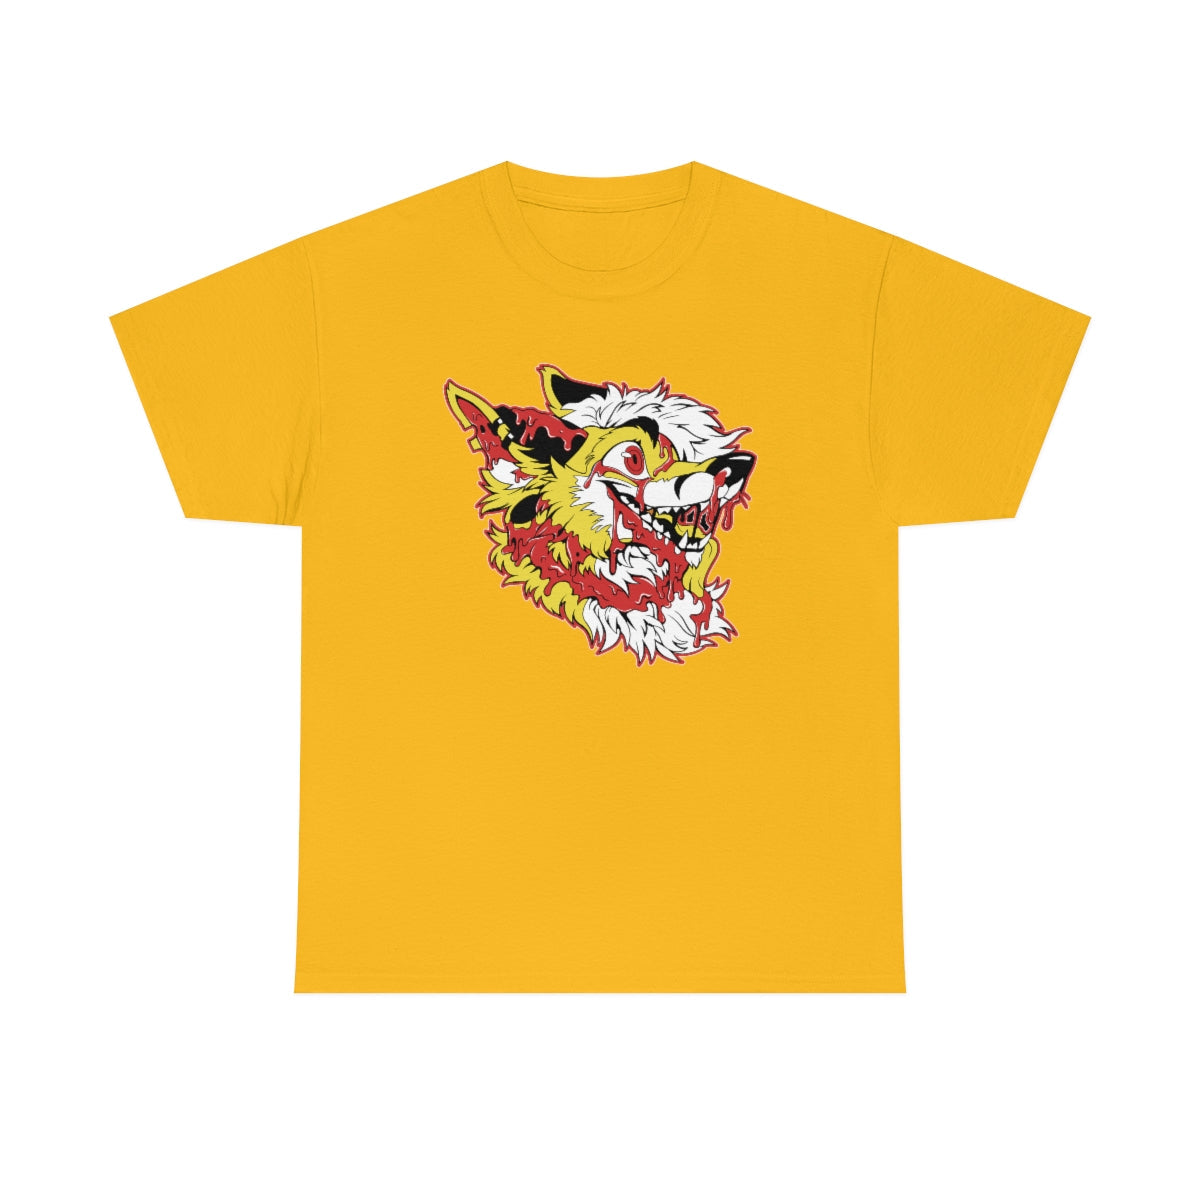 Yellow and Red - T-Shirt T-Shirt Artworktee Gold S 